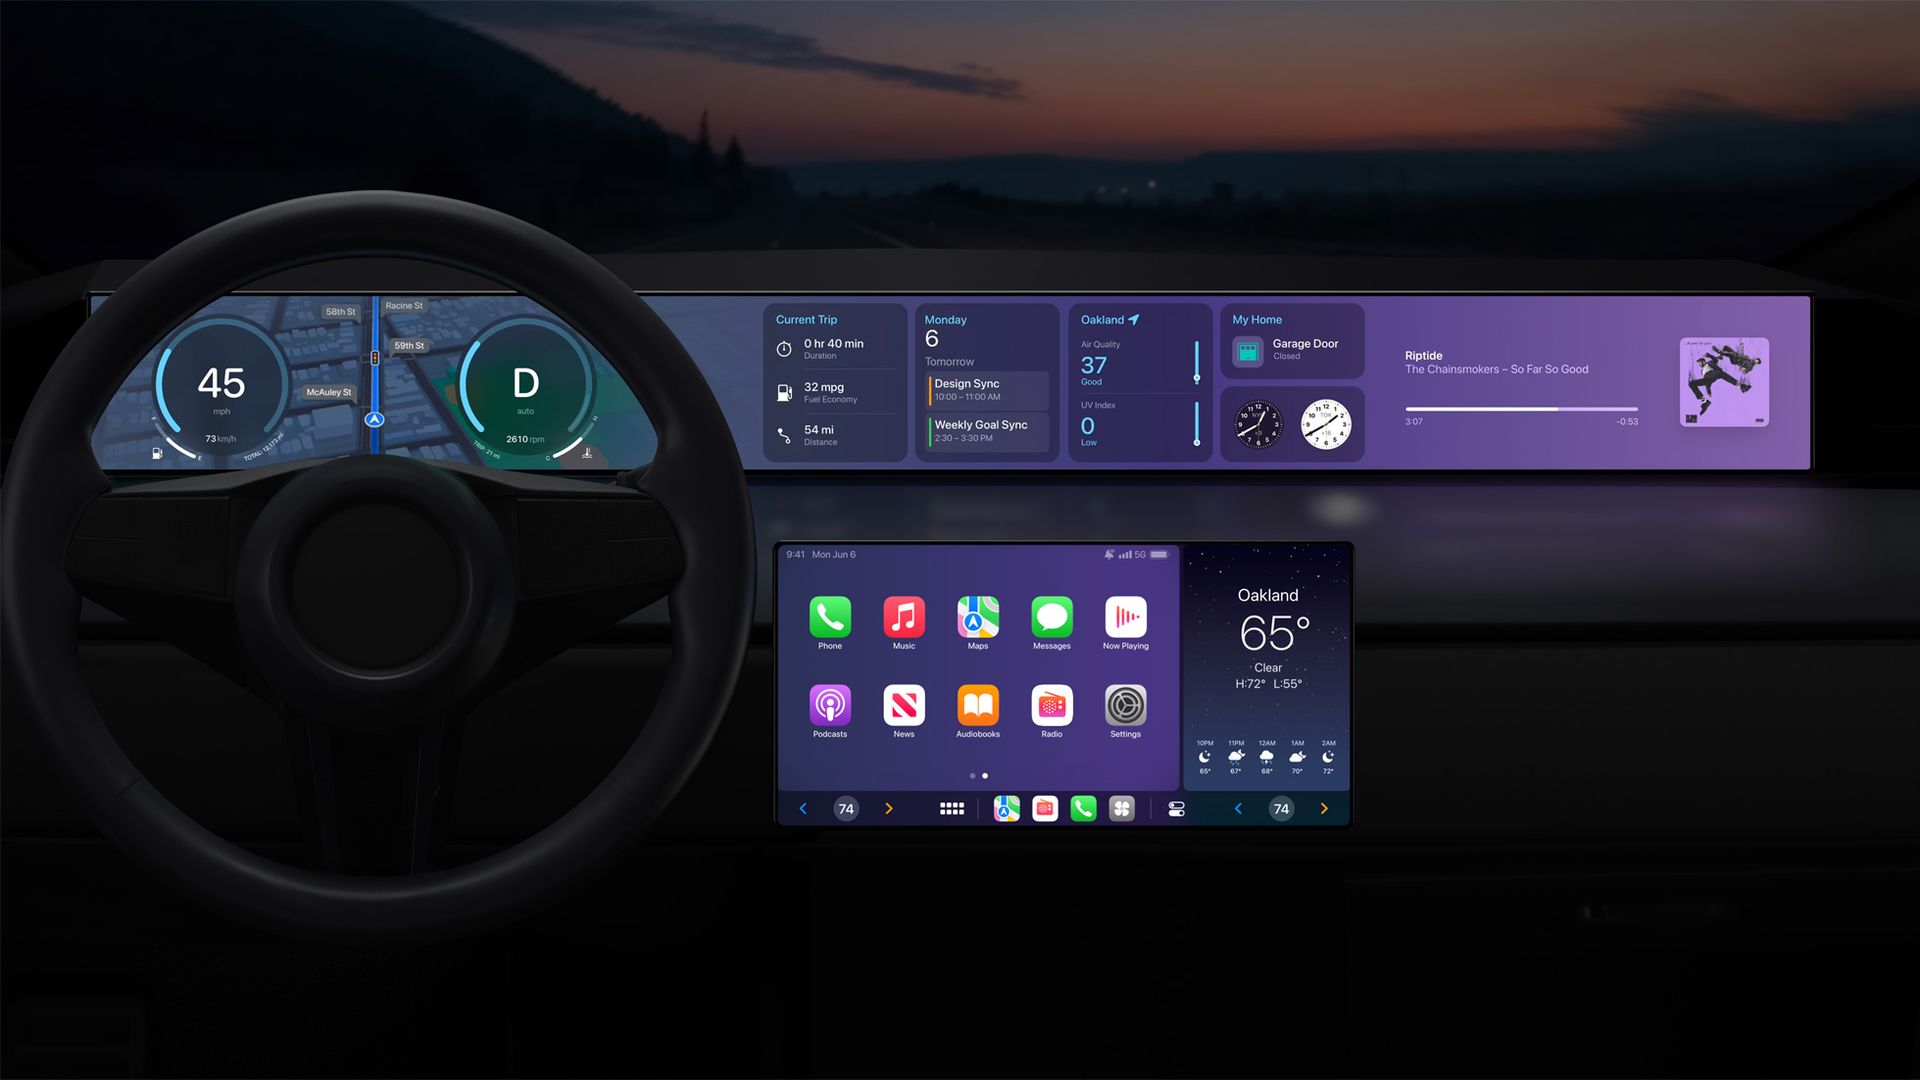 The next generation of CarPlay, as shown by Apple at WWDC2022